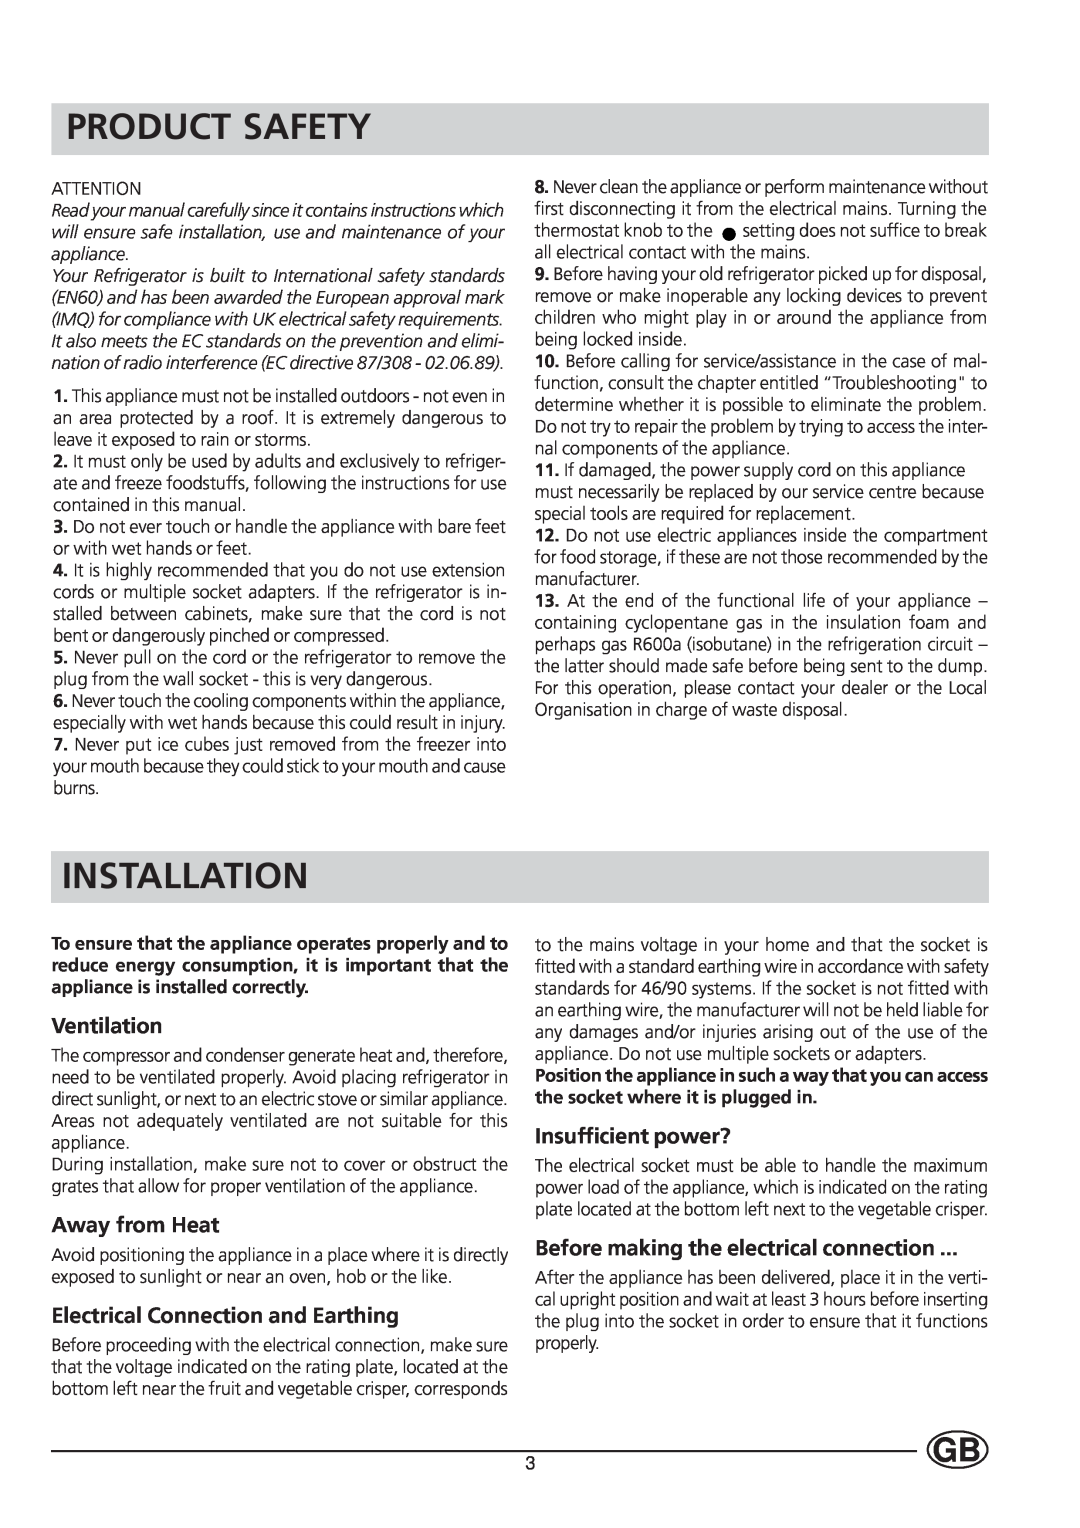 Hotpoint HUT161I manual Product Safety, Installation, Ventilation, Away from Heat, Electrical Connection and Earthing 